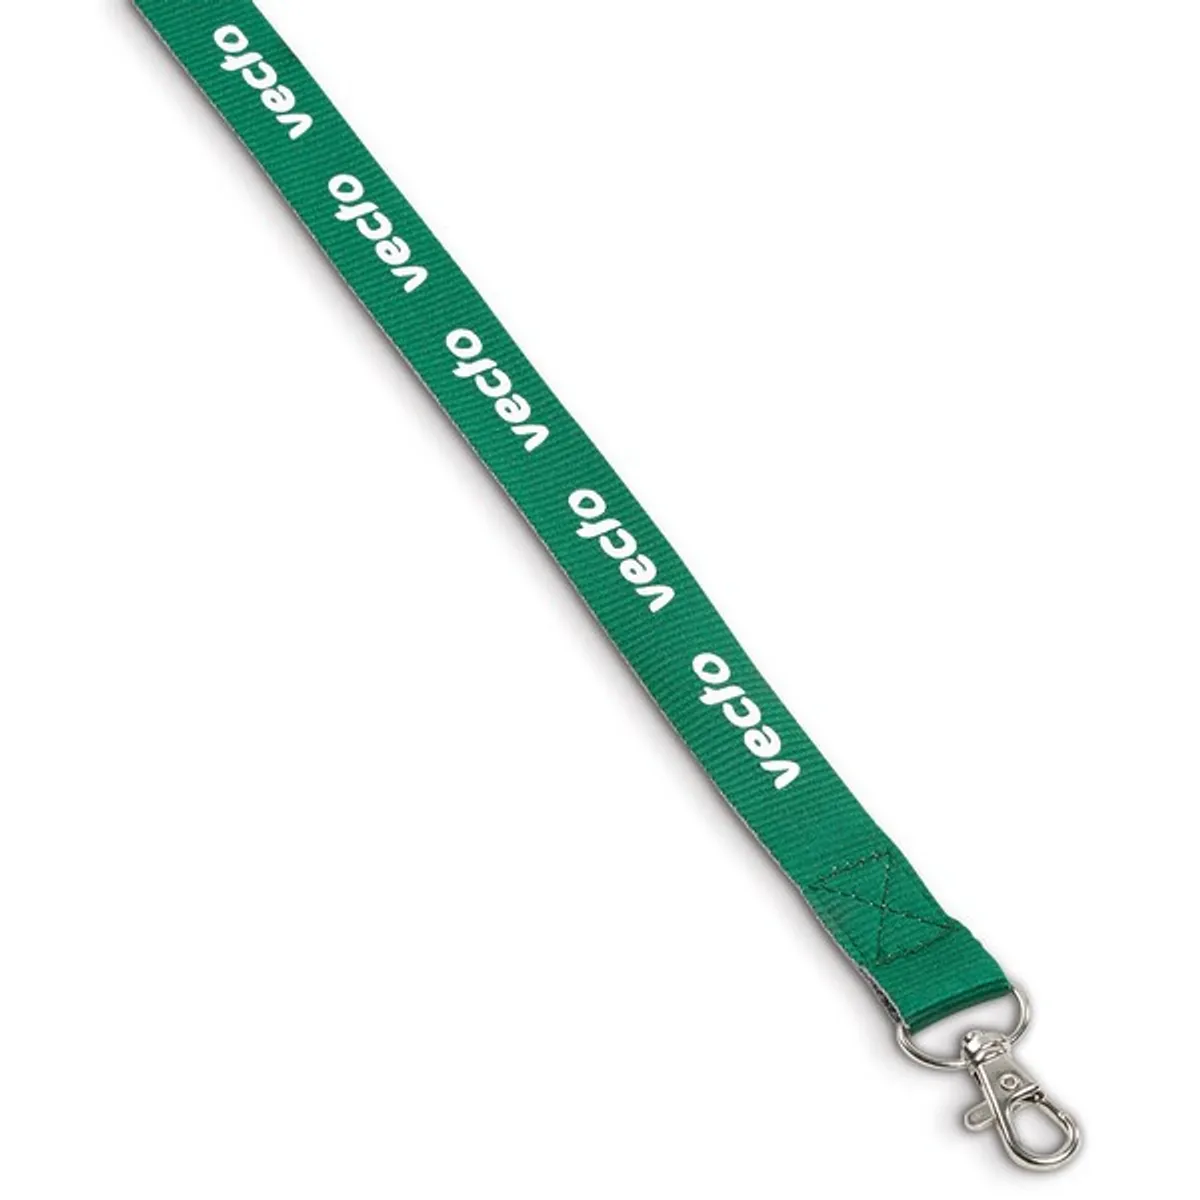 Lanyards And ID Cards